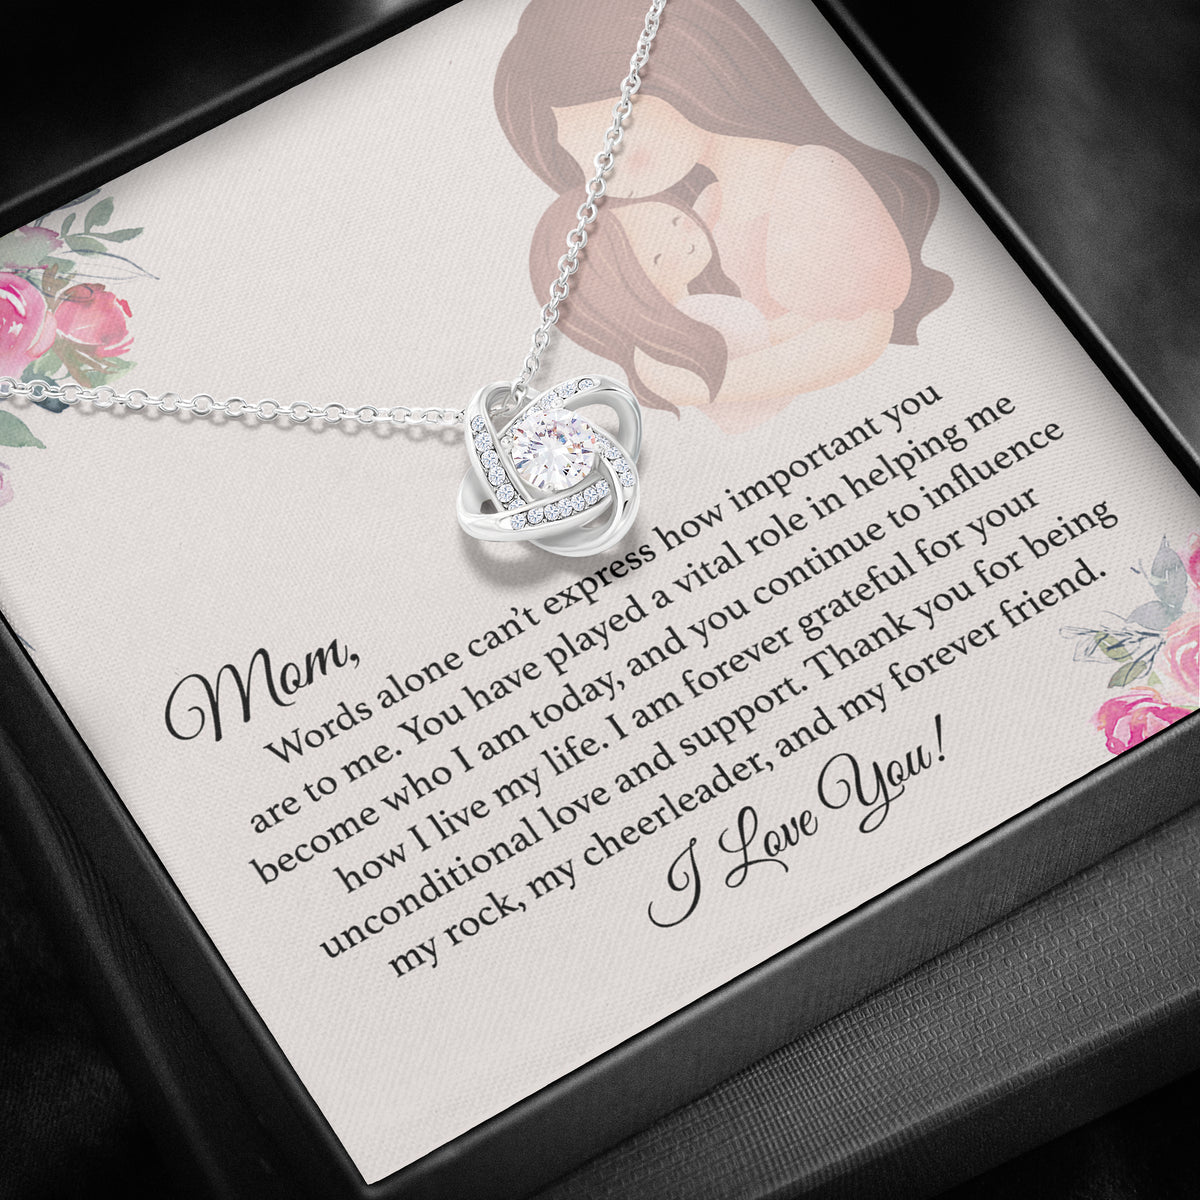 Mom Necklace from Daughter - Word's Can't Express How Important You Are